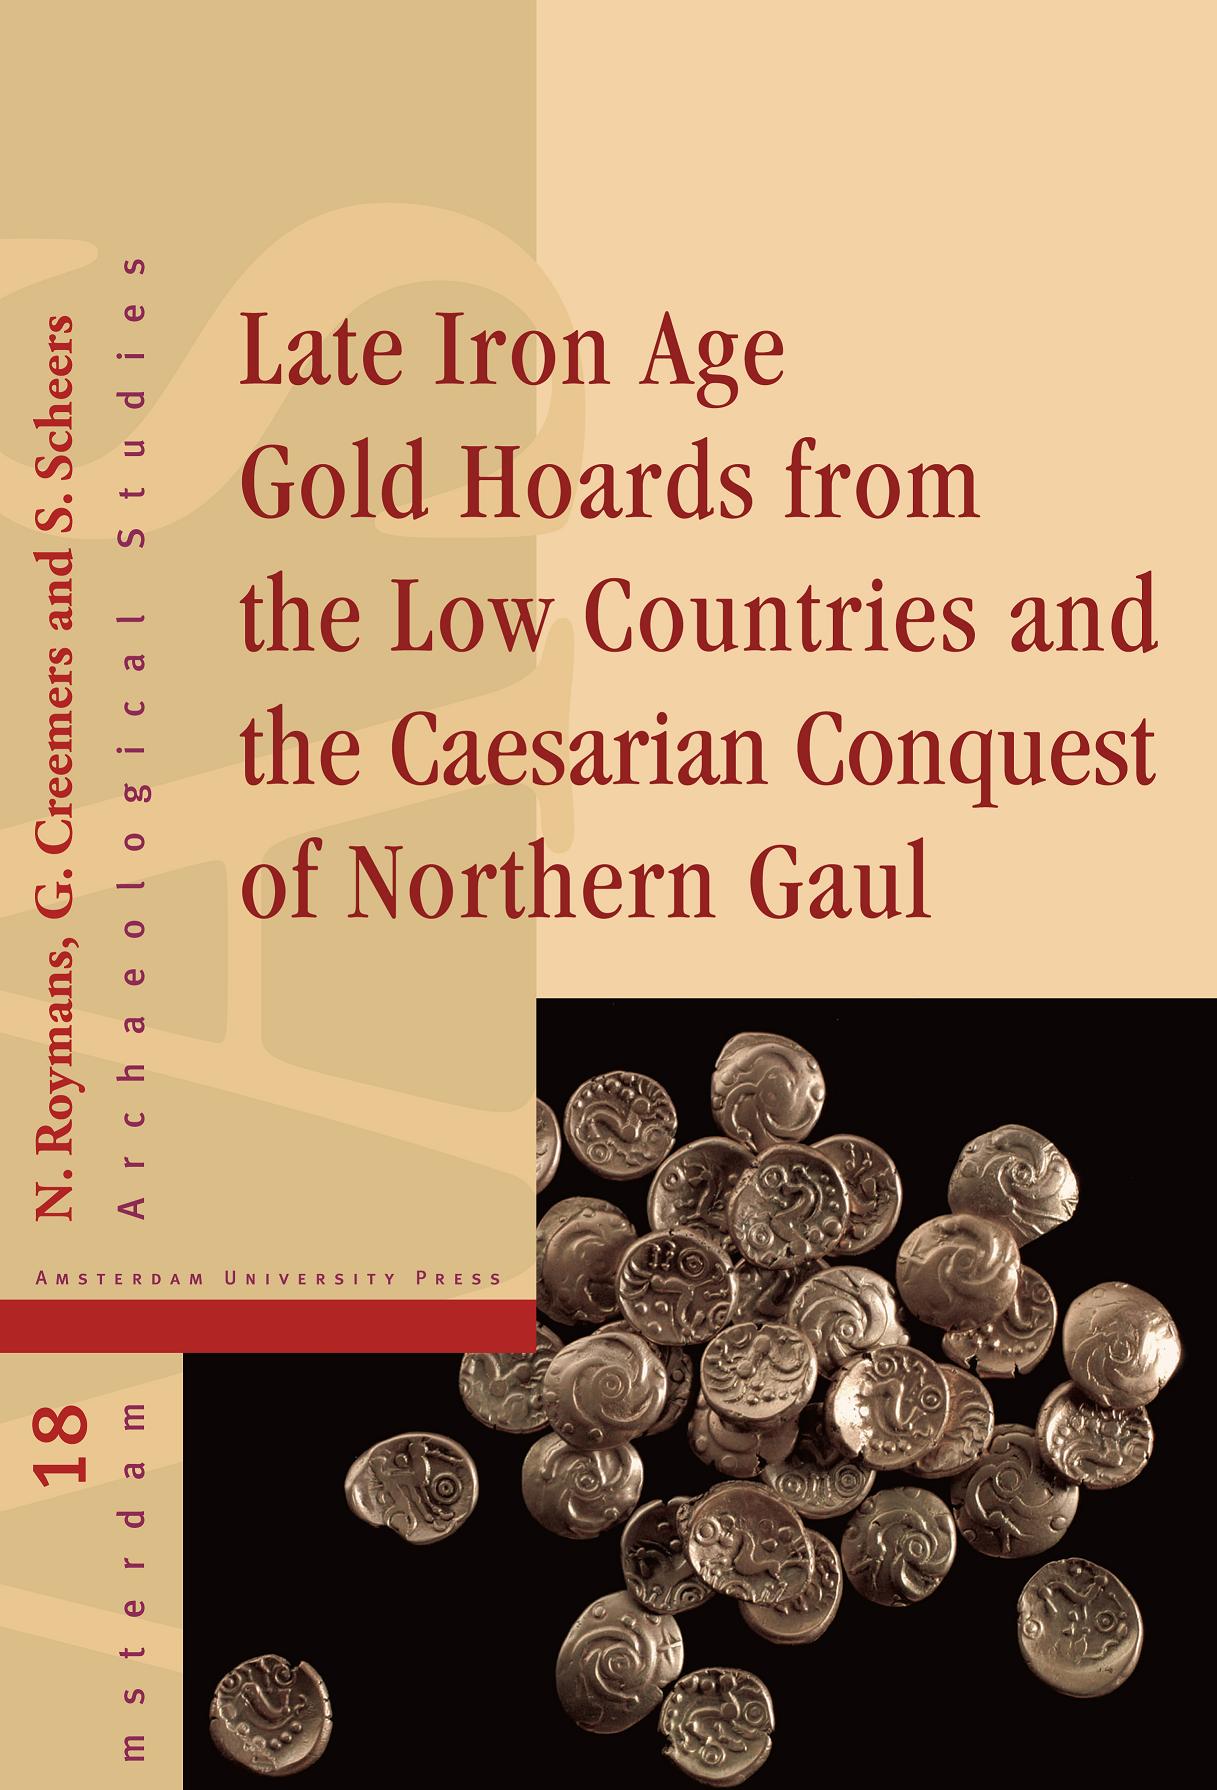 Late Iron Age Gold Hoards from the Low Countries and the Caesarian Conquest of Northern Gaul, 2012, 248 p.